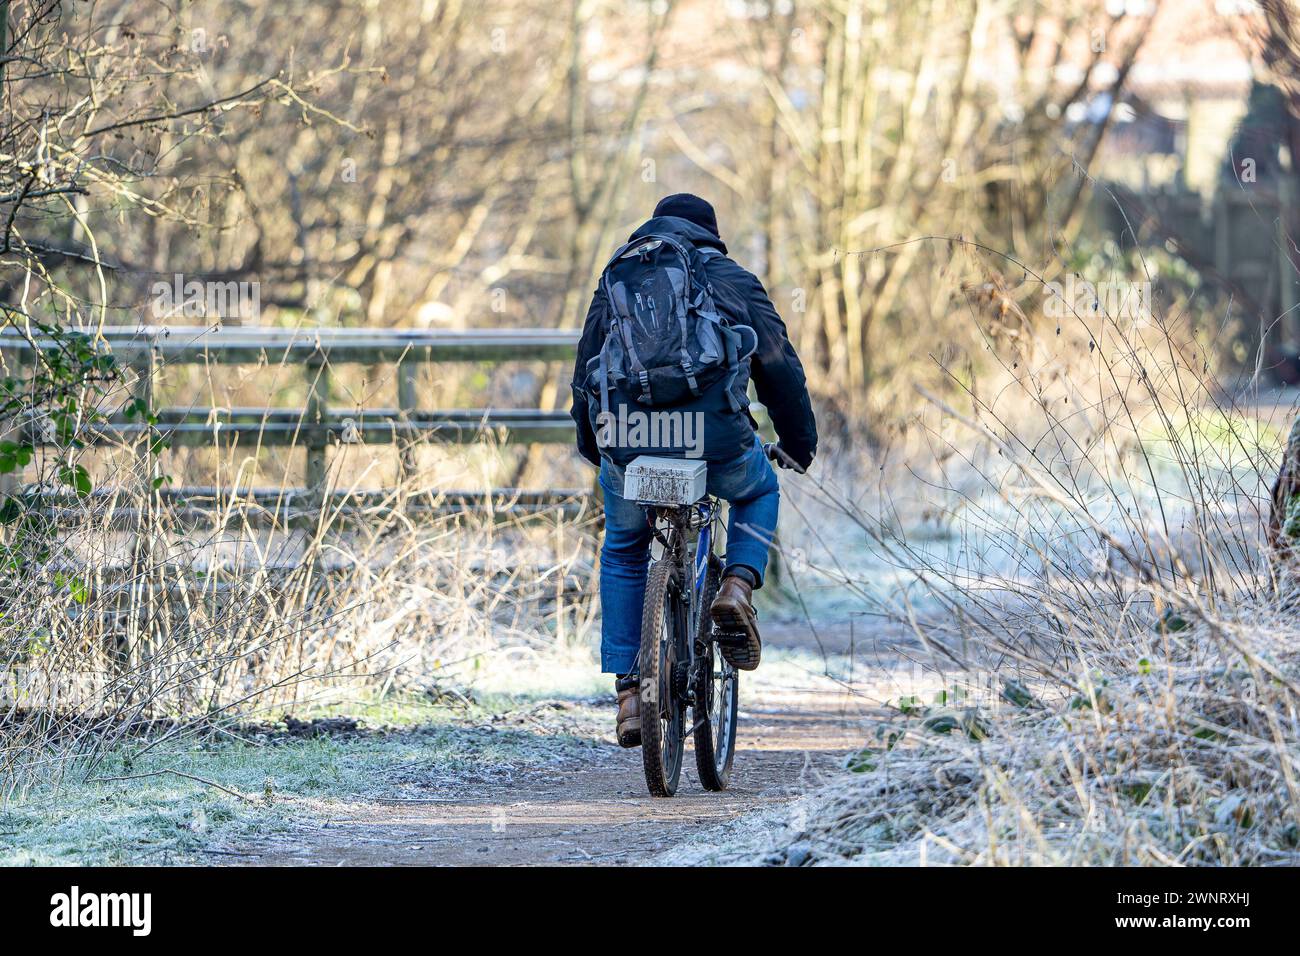 Kidderminster, UK. 19th January, 2024. UK weather: freezing conditions hit the UK as one commuter cycles to work in the frosty conditions today. Credit: Lee Hudson/Alamy Stock Photo